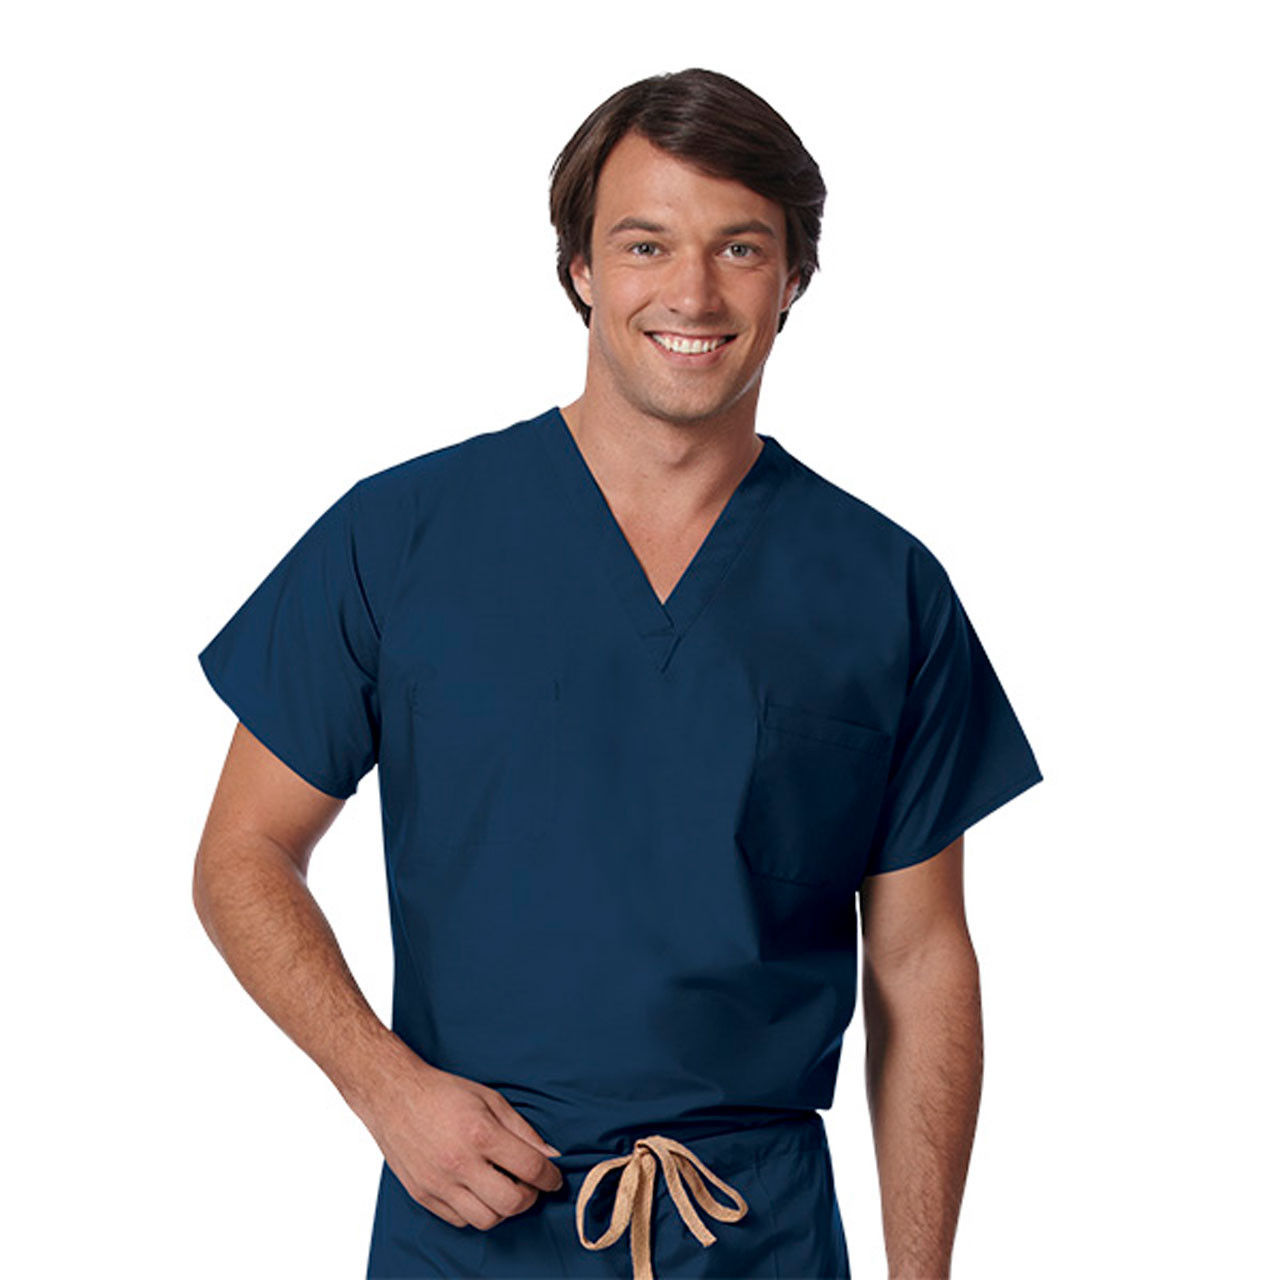 Can the navy surgical scrubs be worn on both sides?